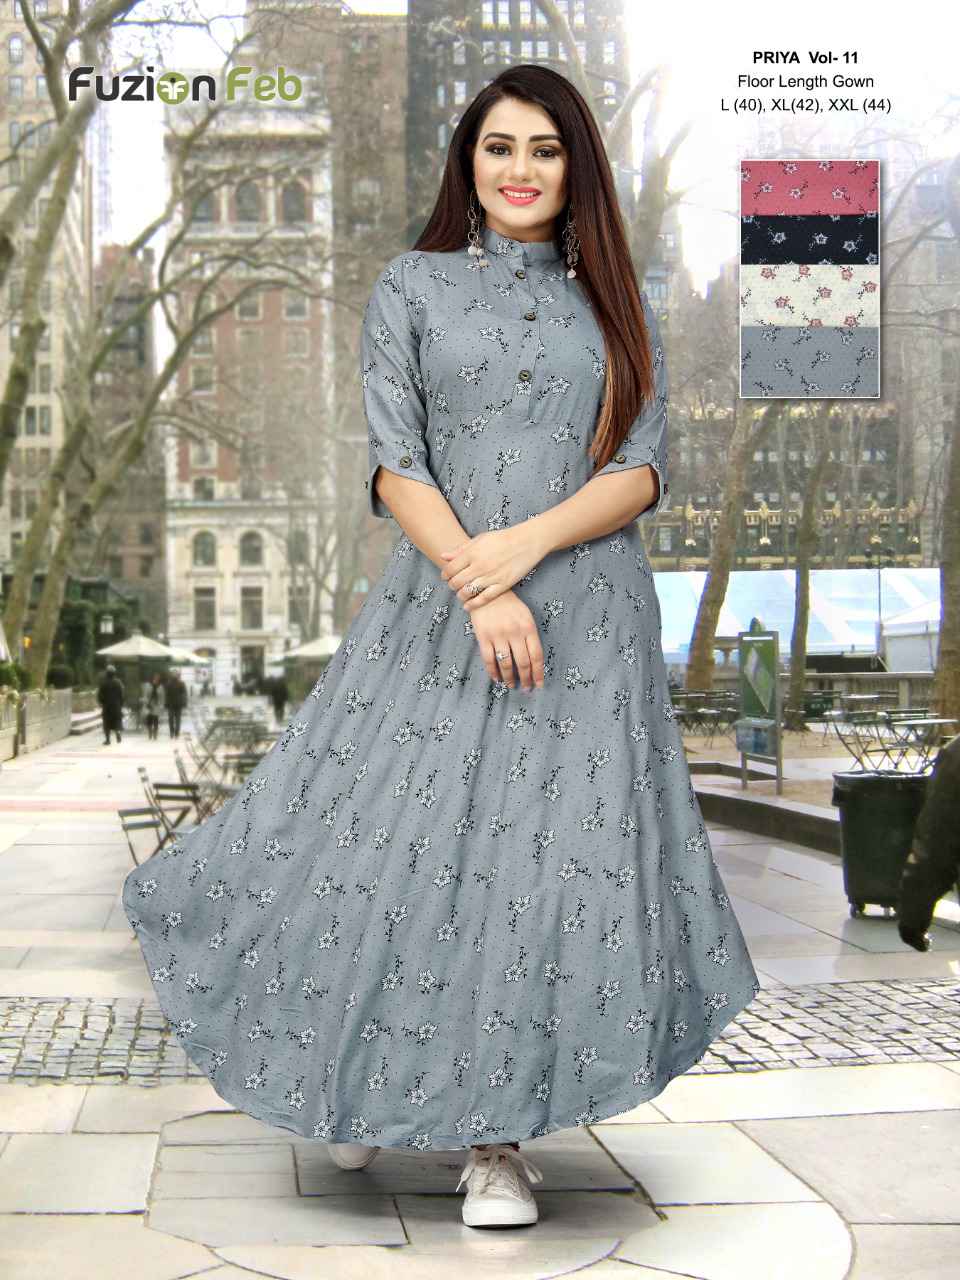 Latest Kurti Designs for Stylish and Modern Look - Fashion Qween